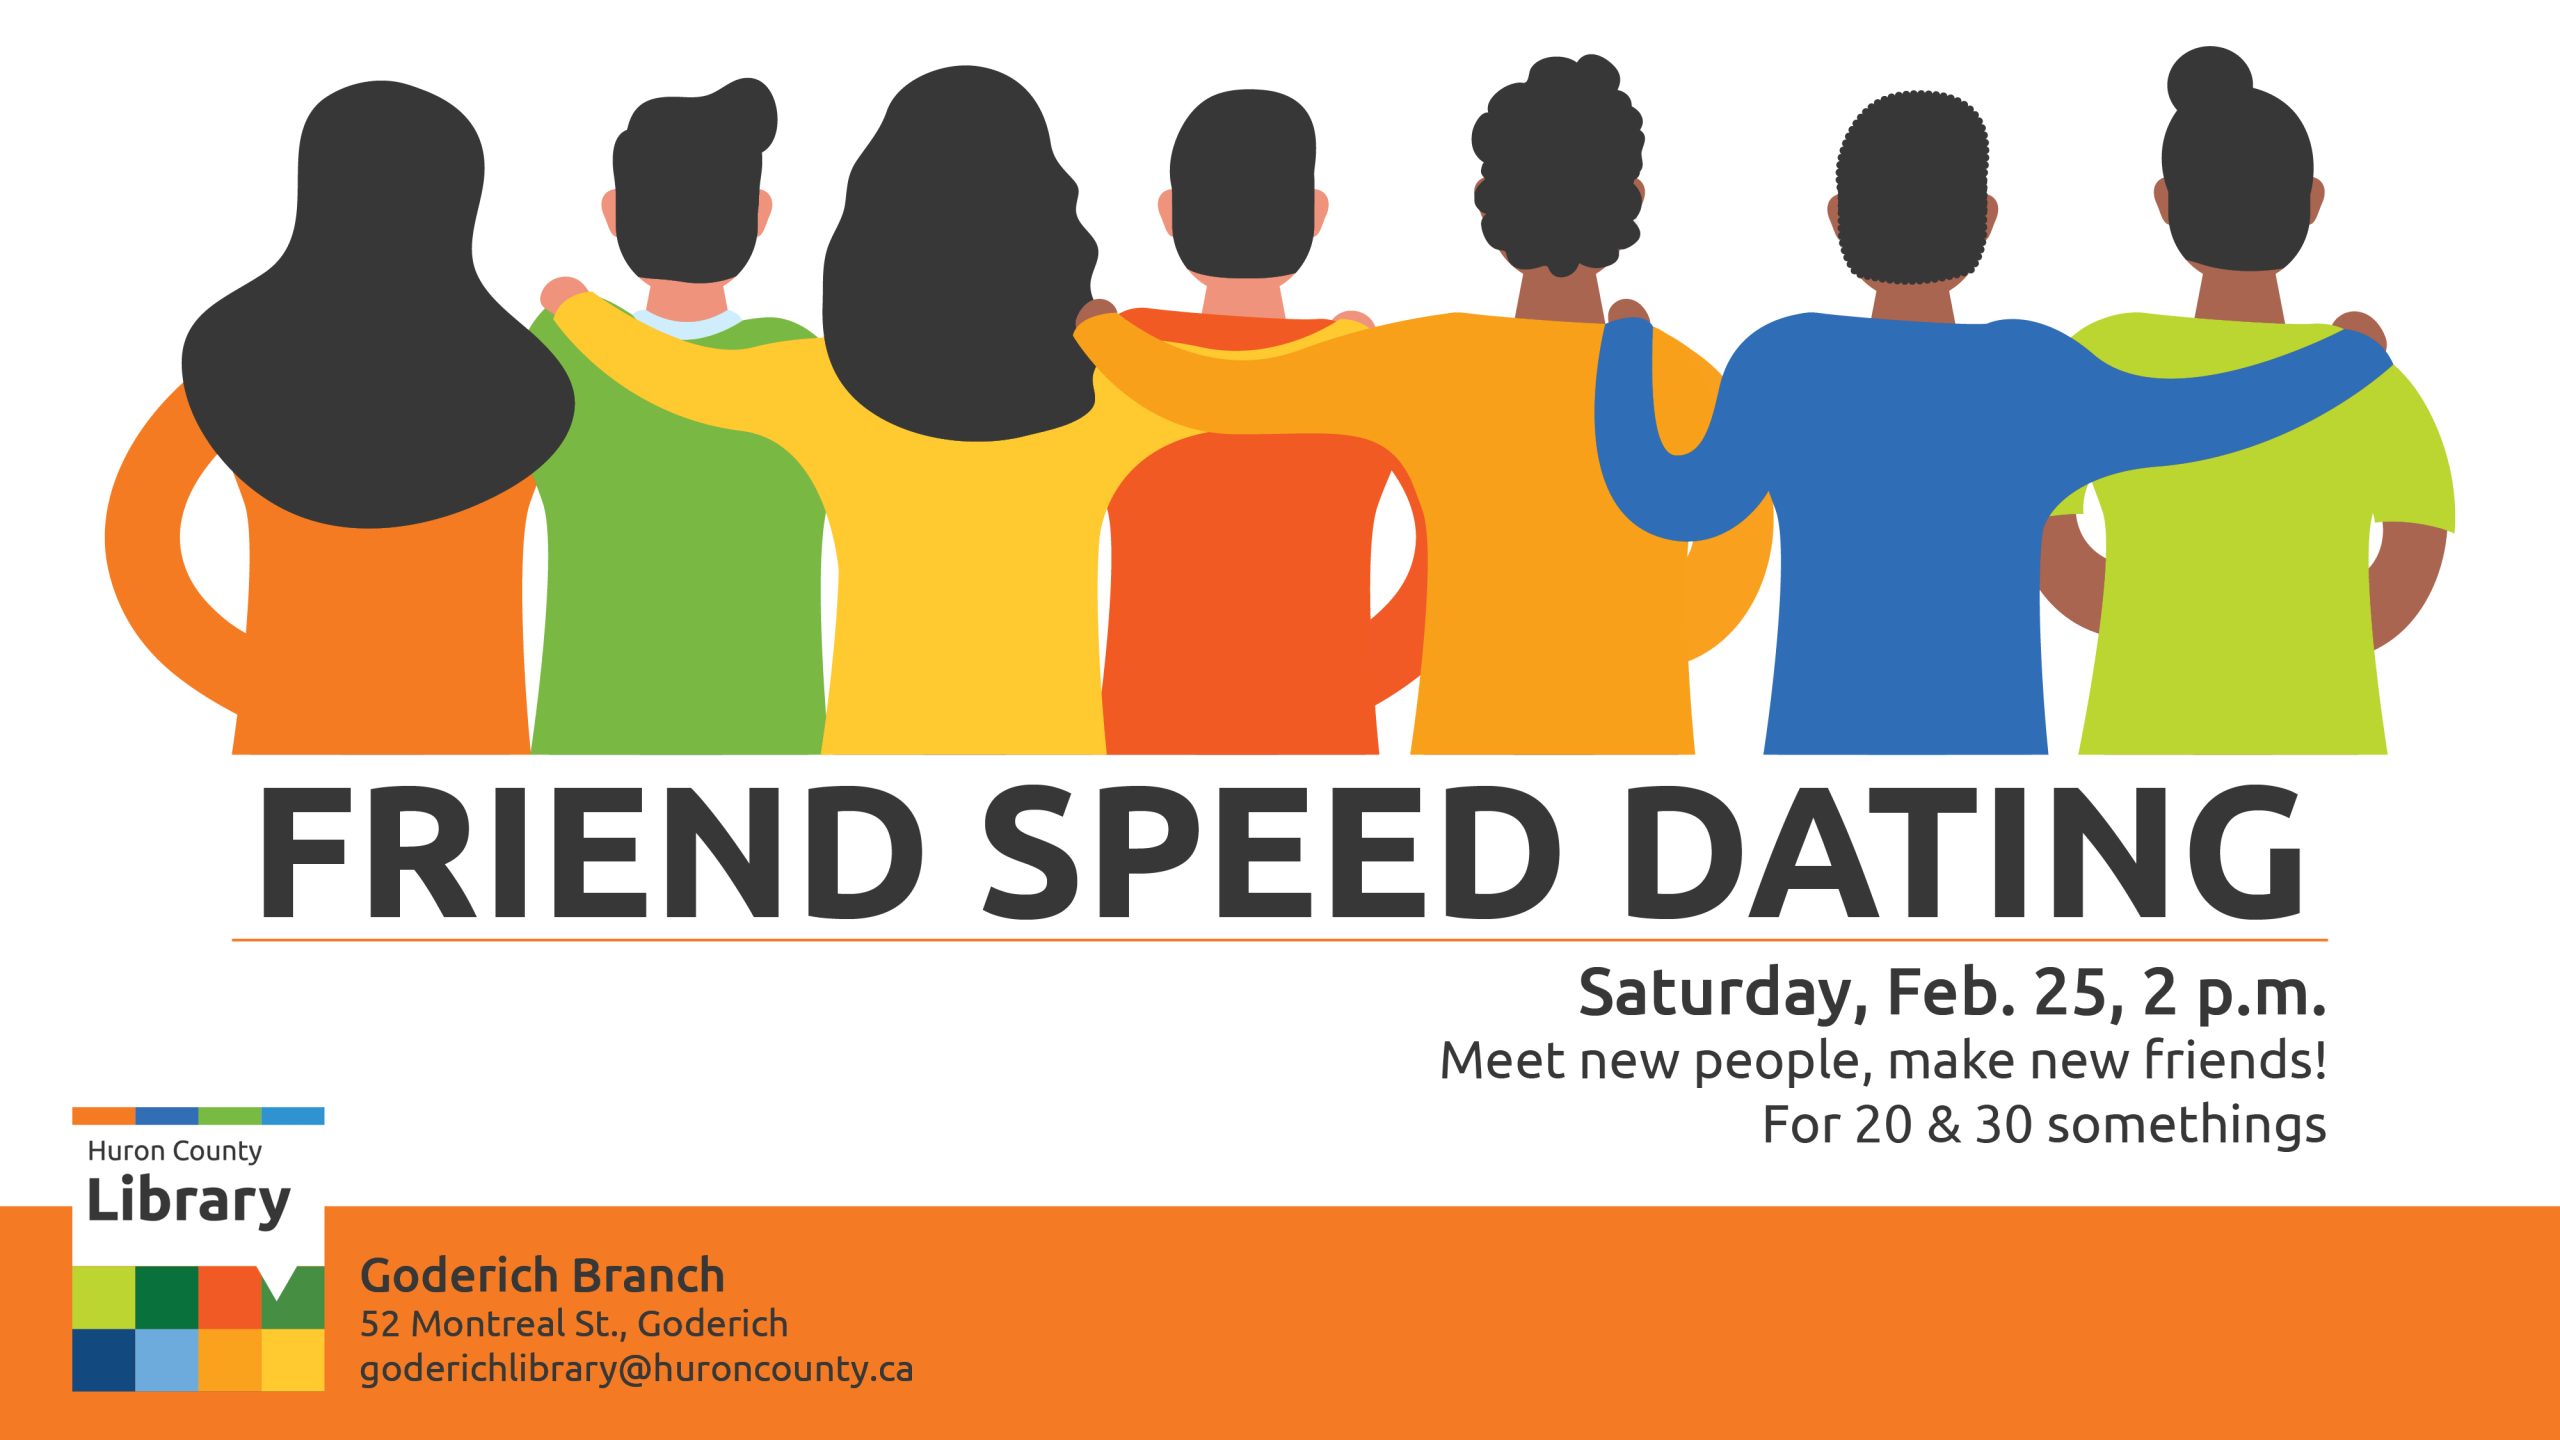 Illustration of a group of friends with their arms around each other's shoulders. Text to promote friend speed dating at the Goderich Branch